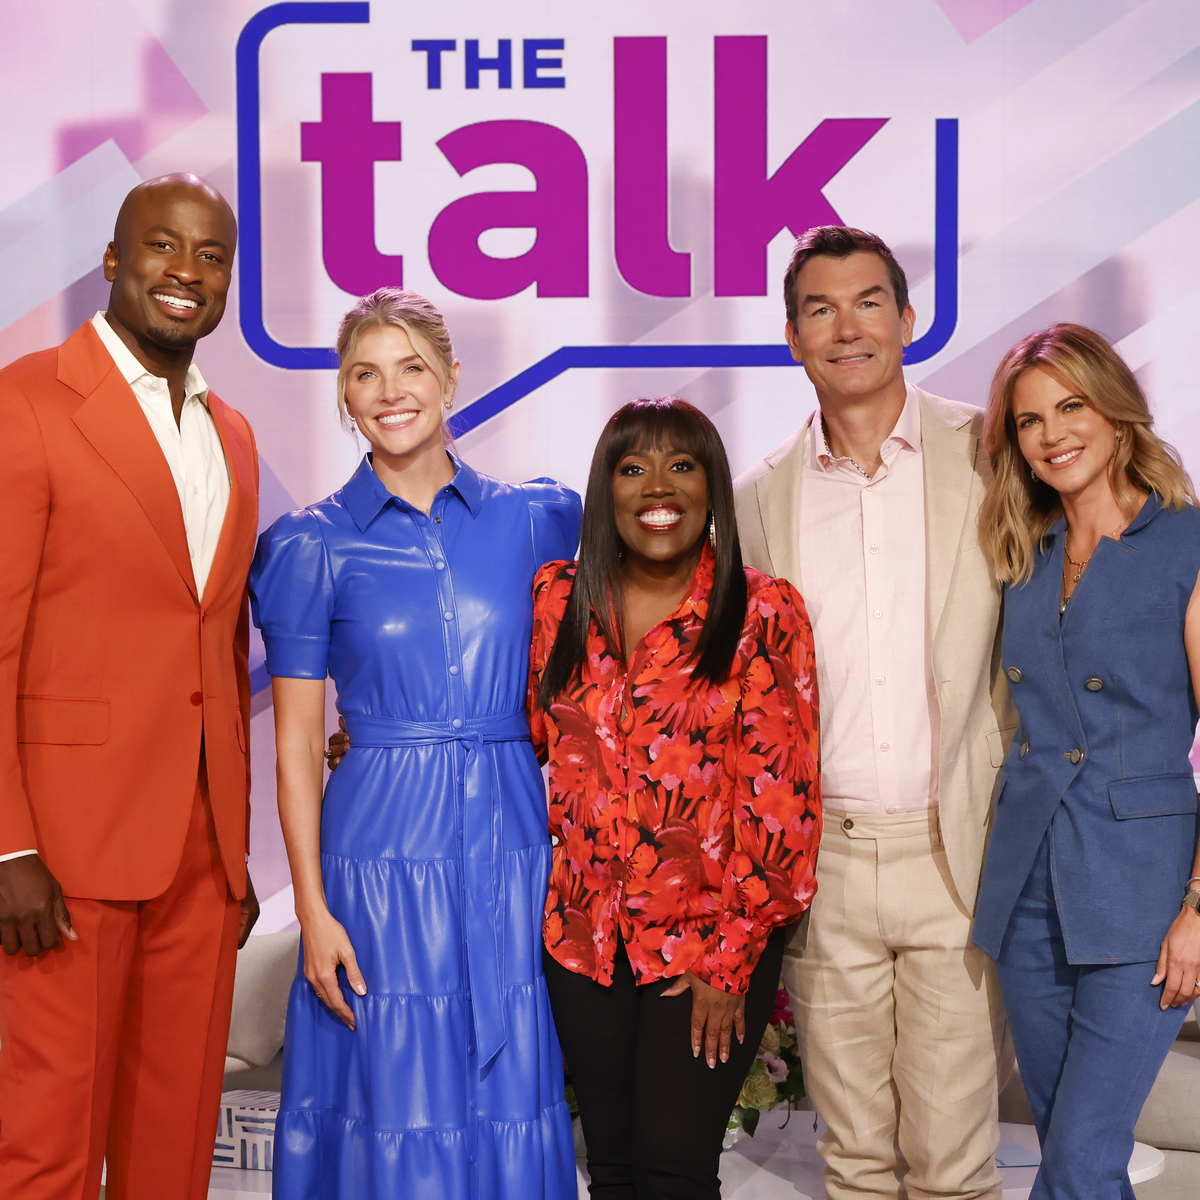 CBS show \'The Talk\' to end after 15 seasons